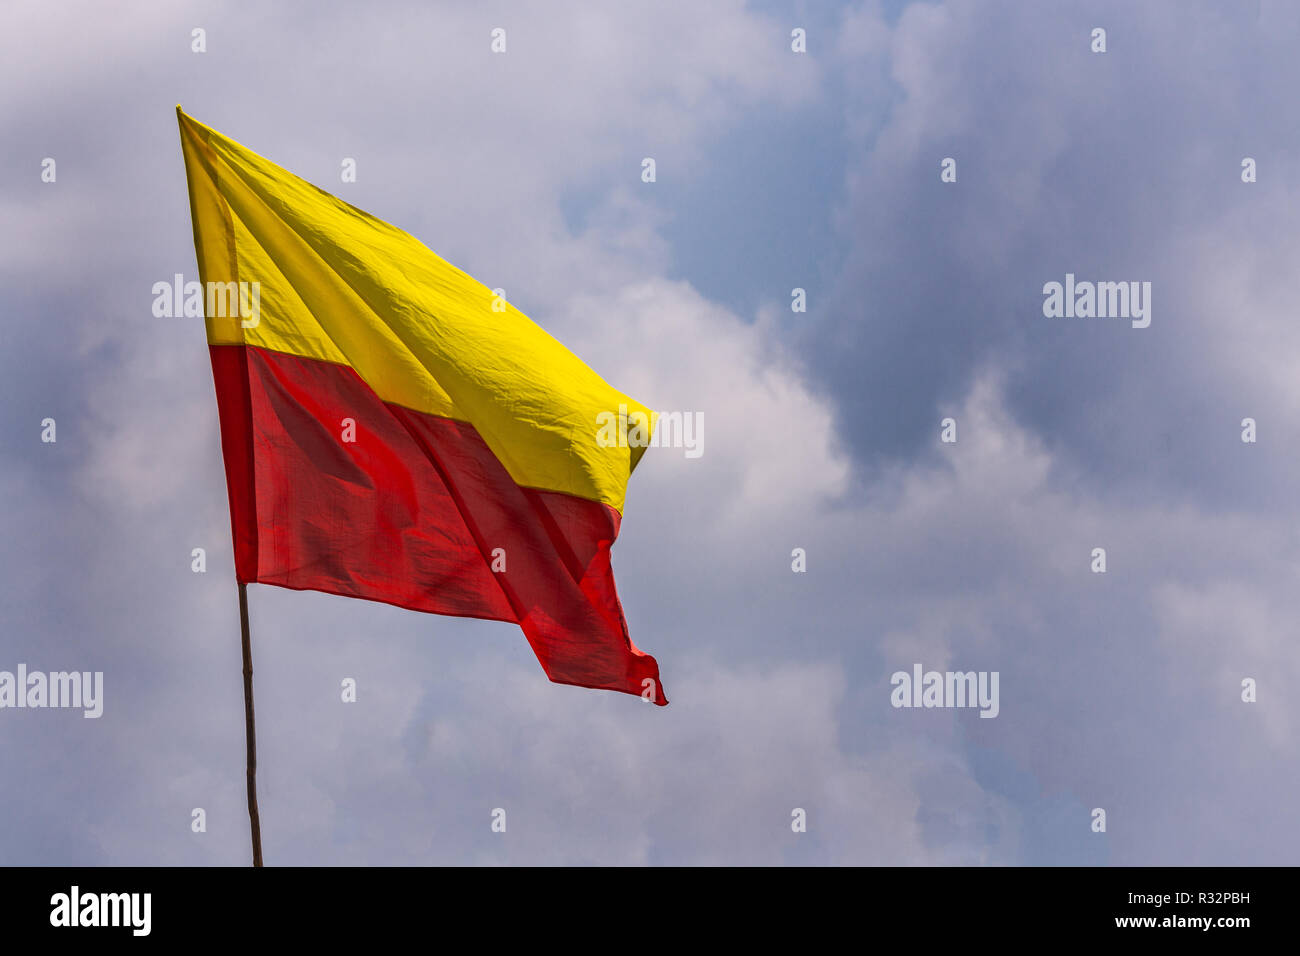 Belur, Karnataka, India - November 2, 2013: Yellow and red State flag on pole floats against blue sky with white clouds. Stock Photo